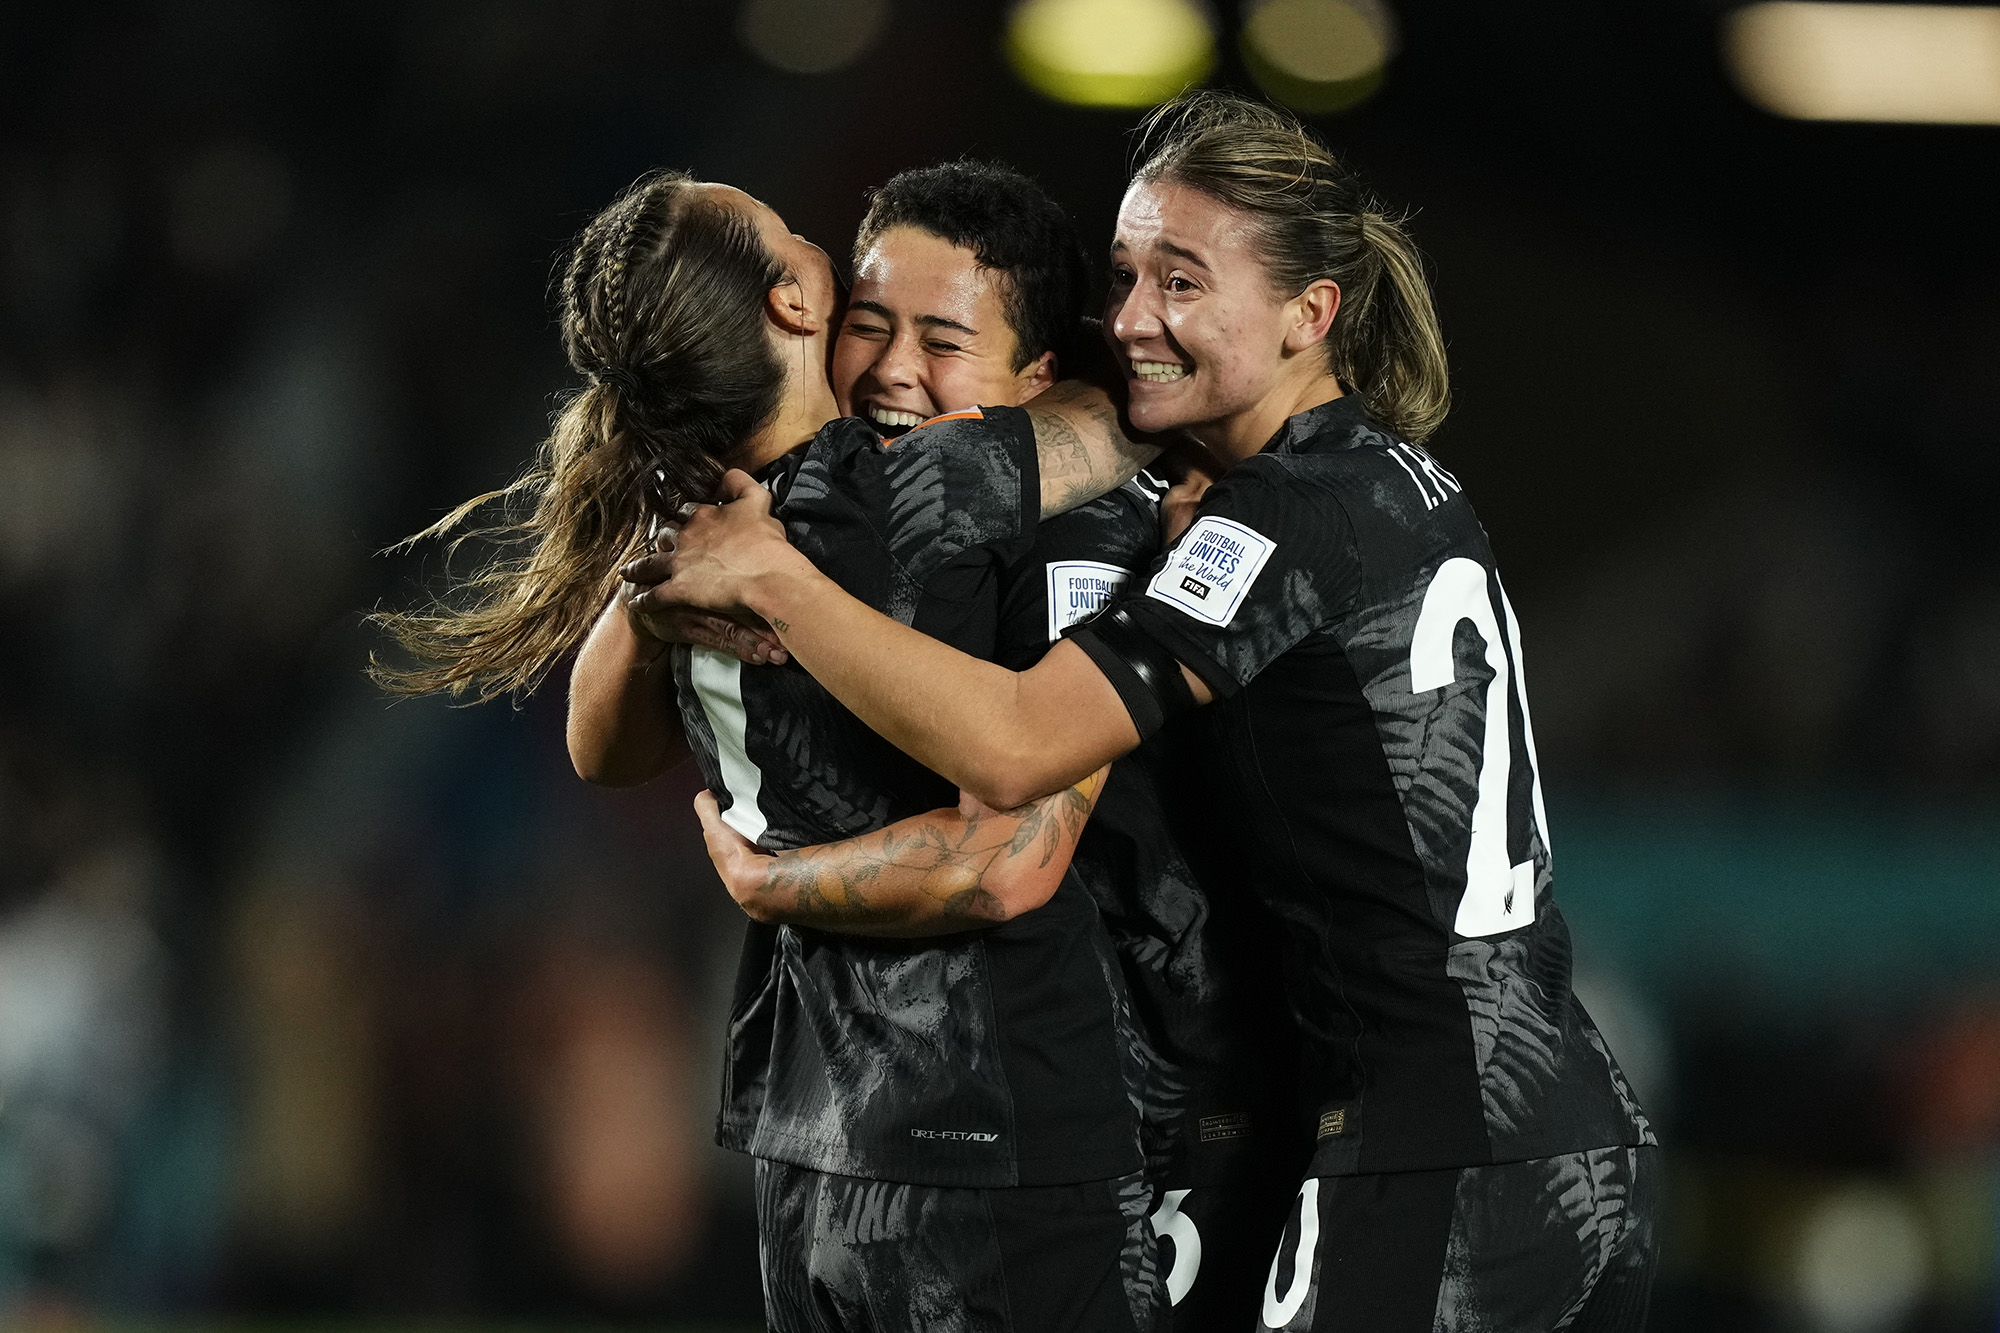 Malia Steinmetz, center, celebrates victory after the FIFA Women's World Cup Group A match between New Zealand and Norway at Eden Park on July 20, in Auckland, New Zealand. 